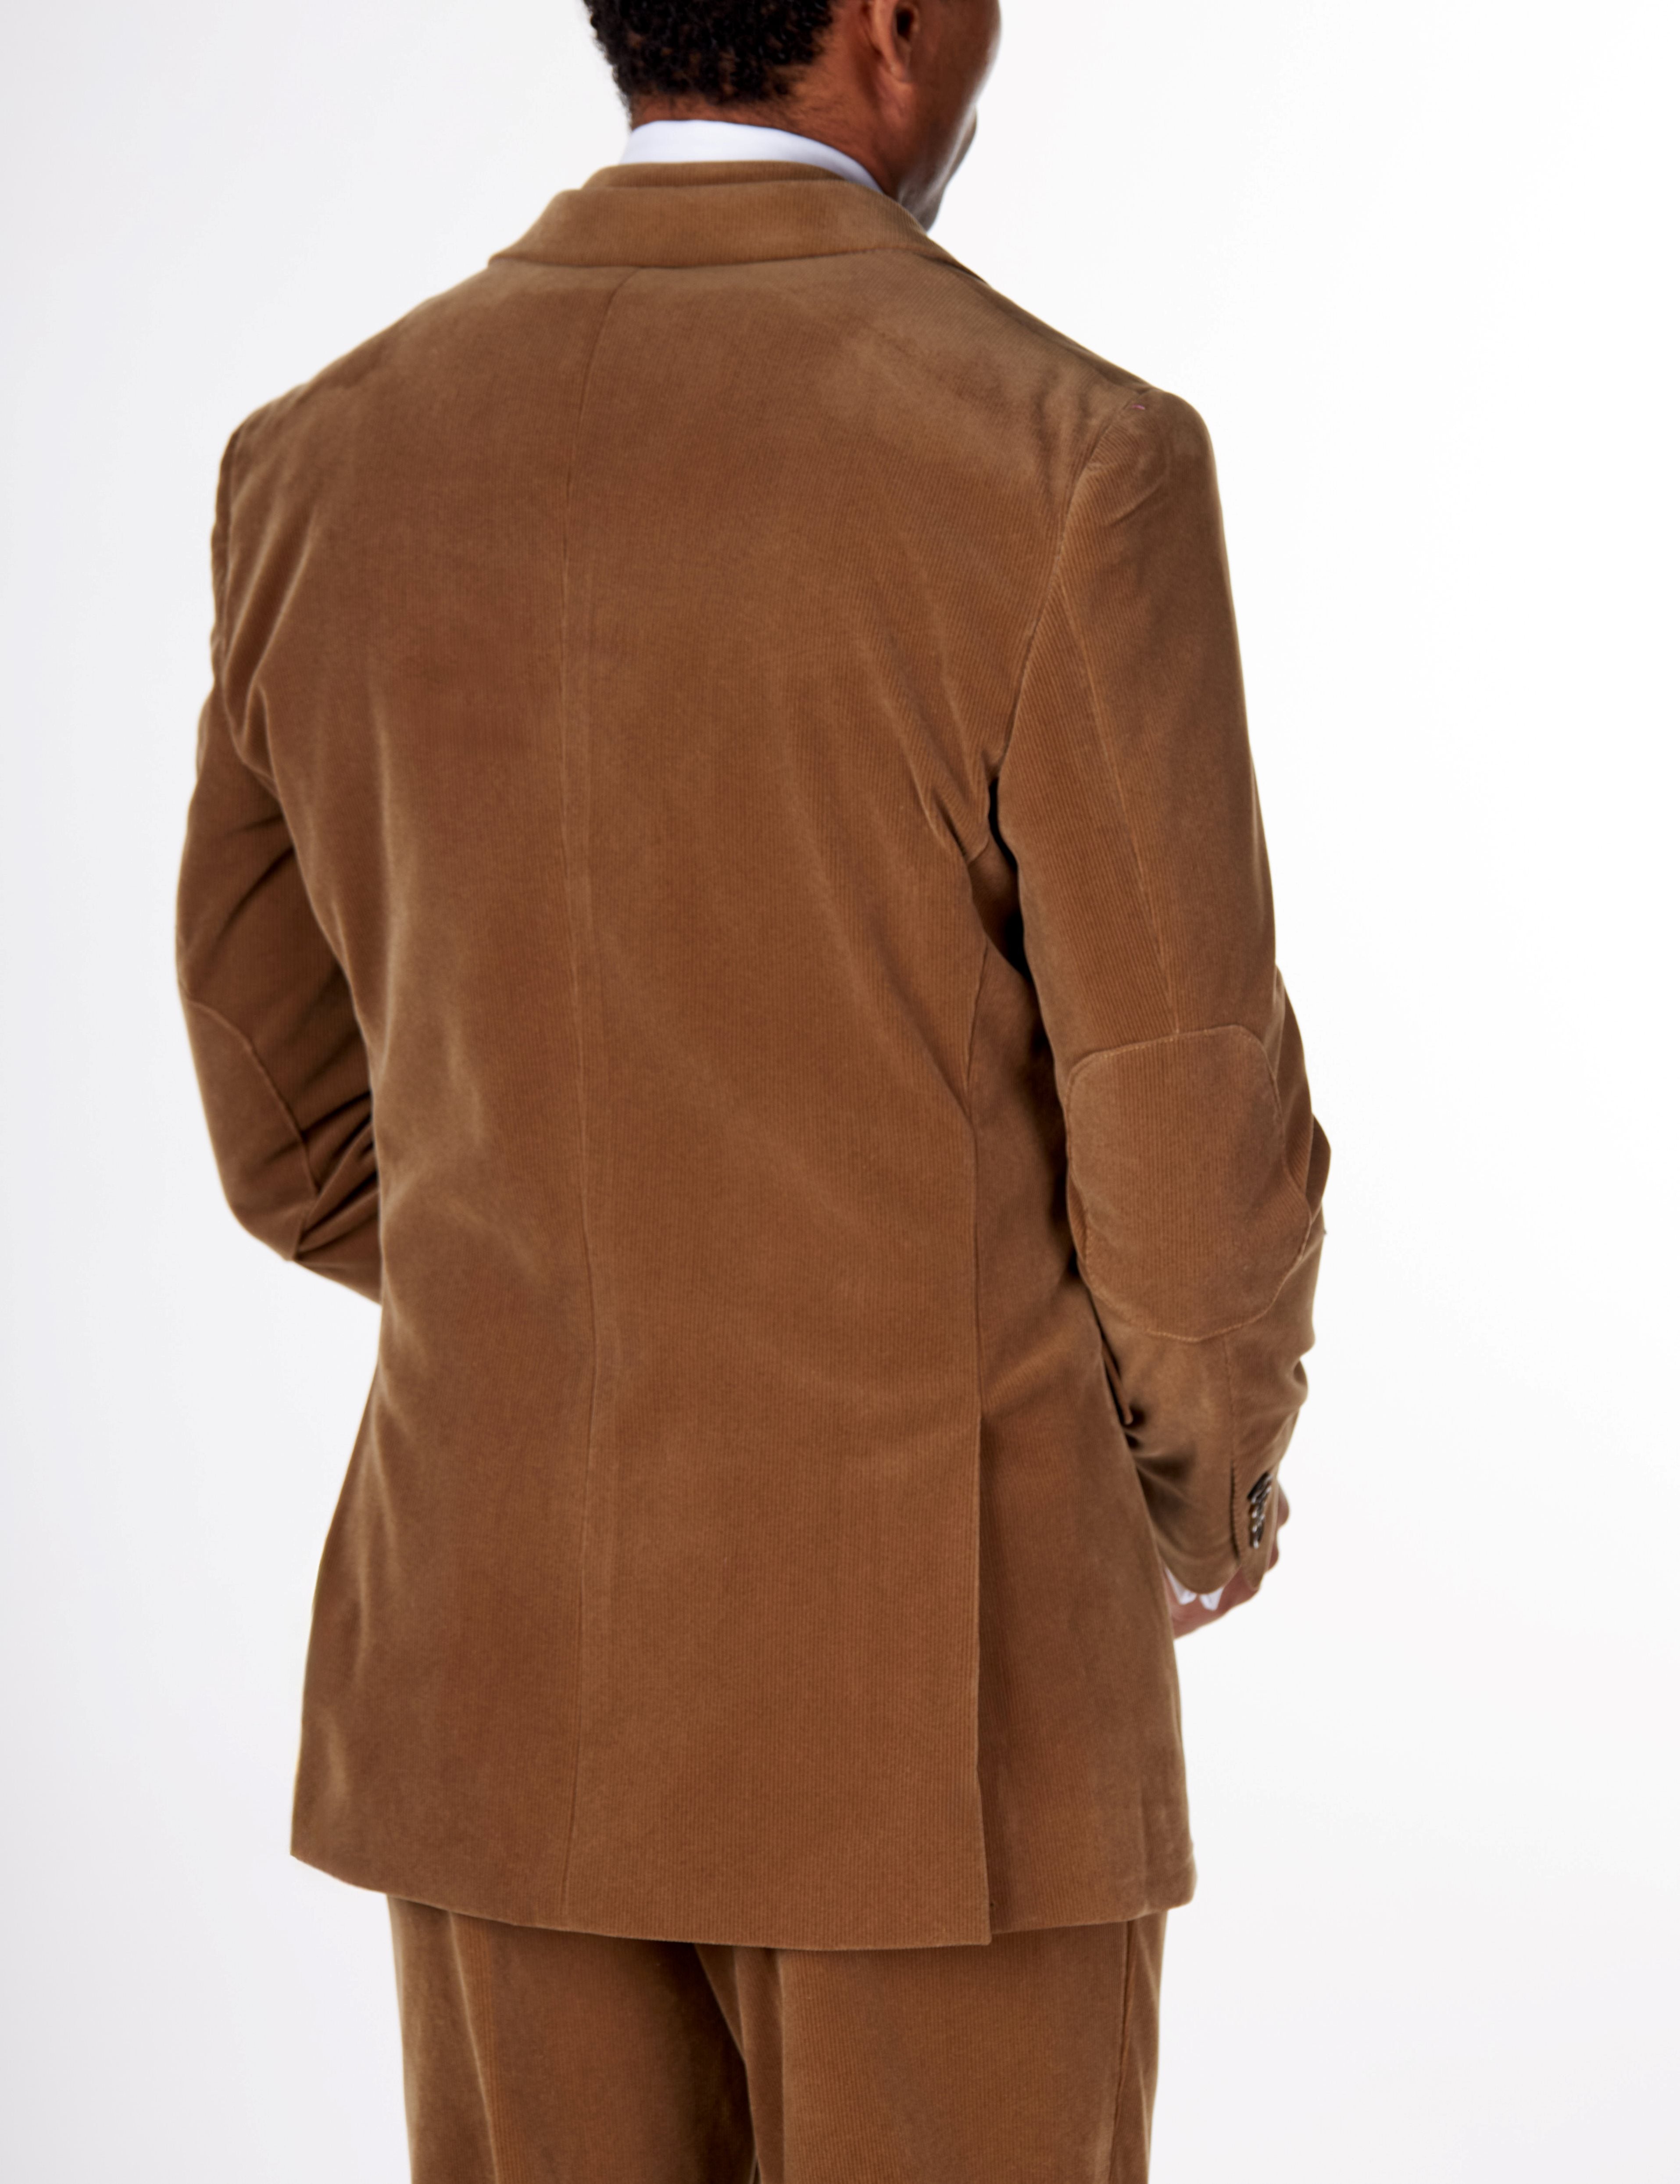 CORDUORY TAILORED FIT SUIT IN TAN